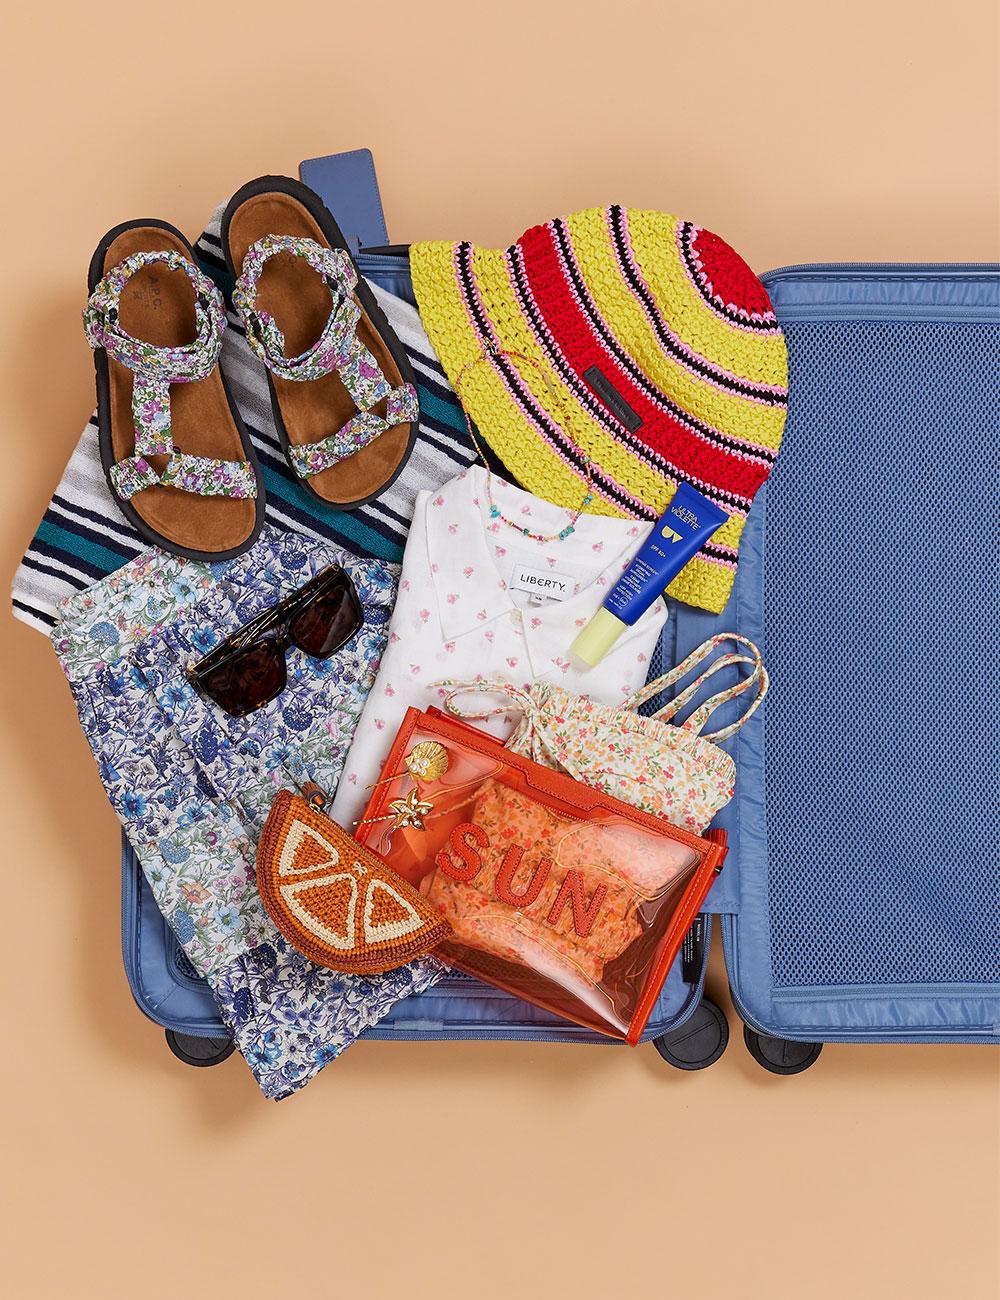 44 Beach Essentials for the Ultimate 2023 Vacation Packing List